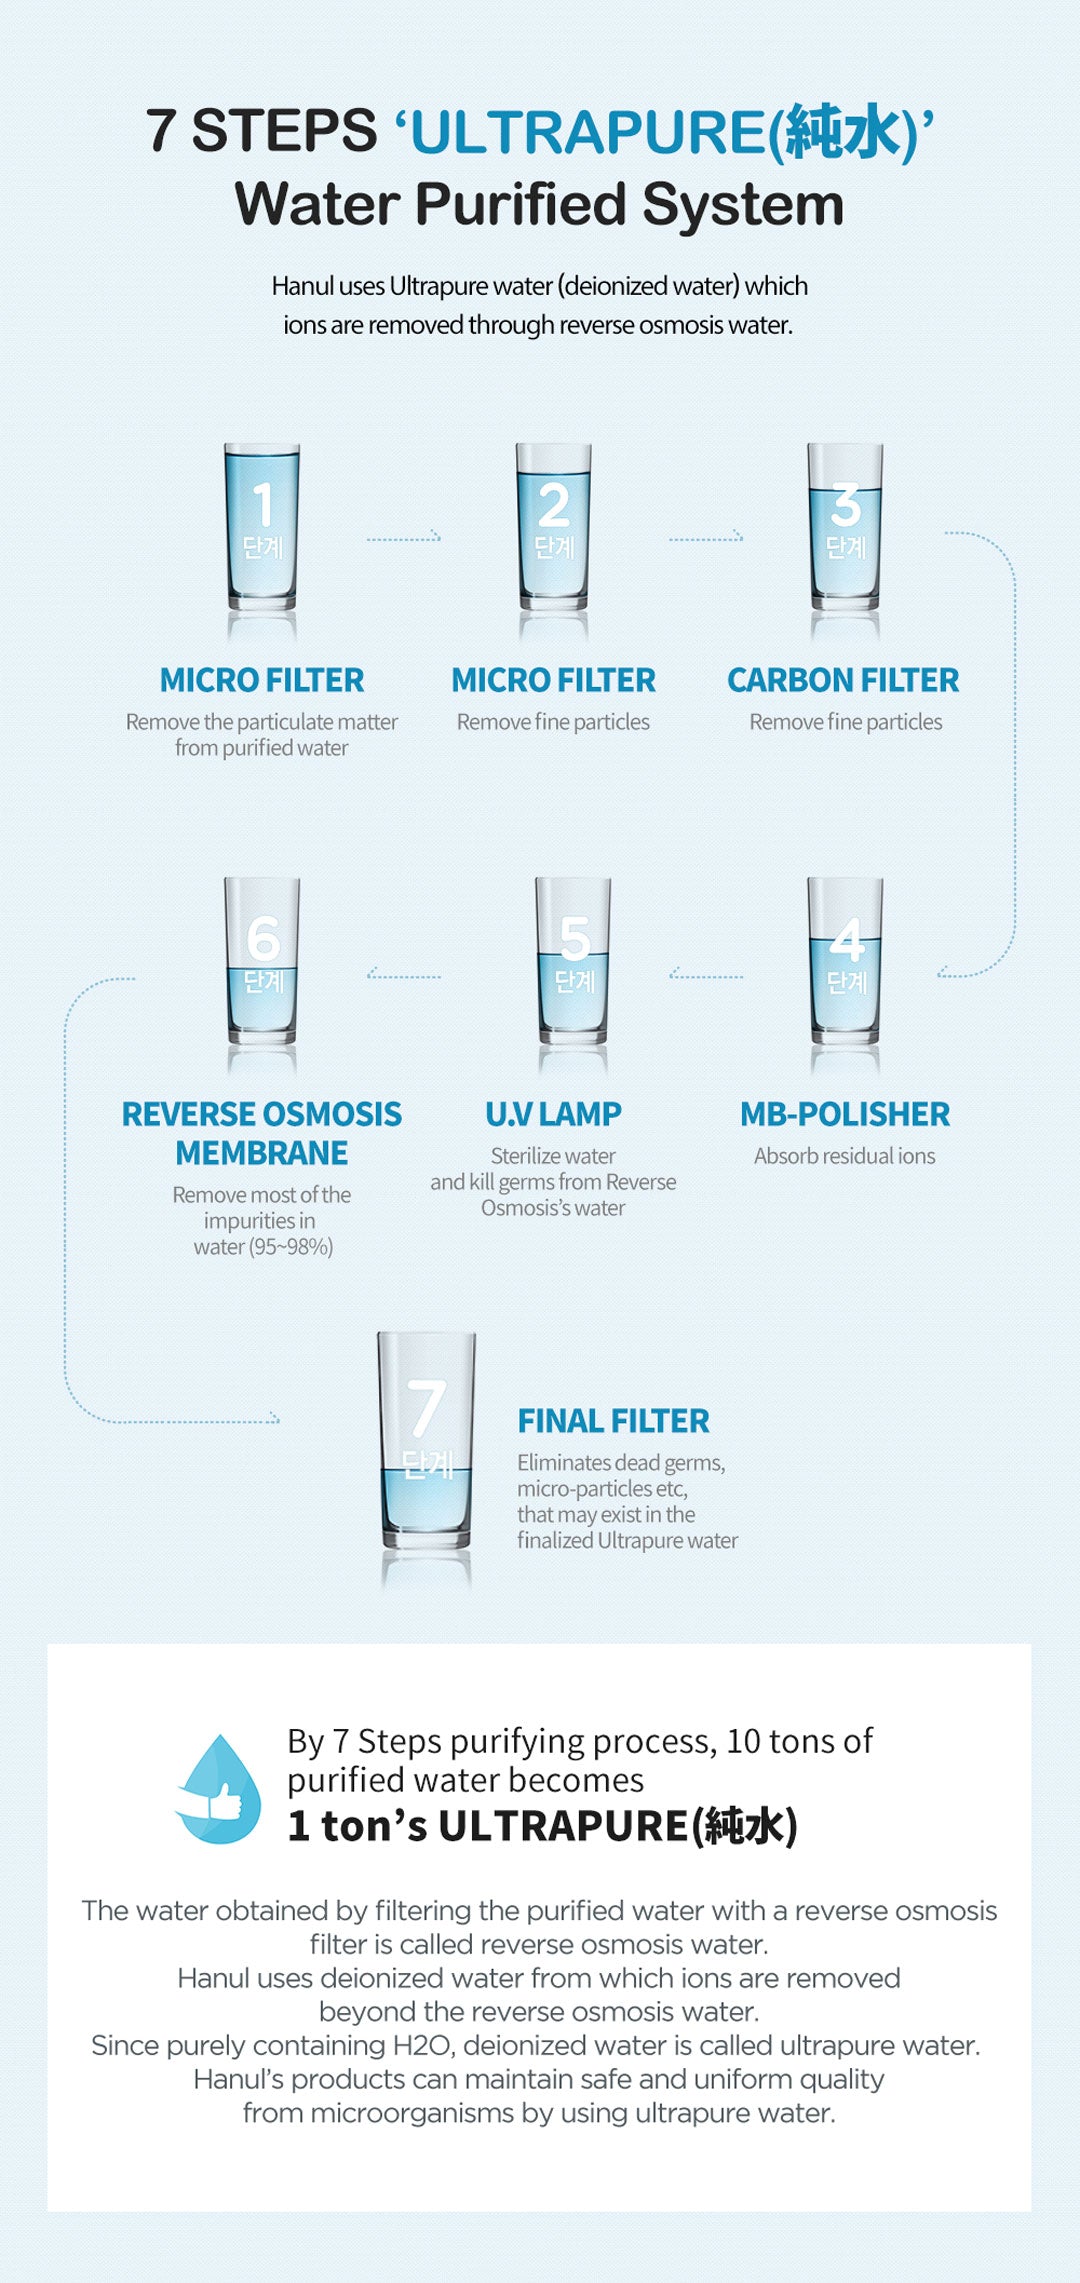 RICO 7 Steps Ultrapure Water